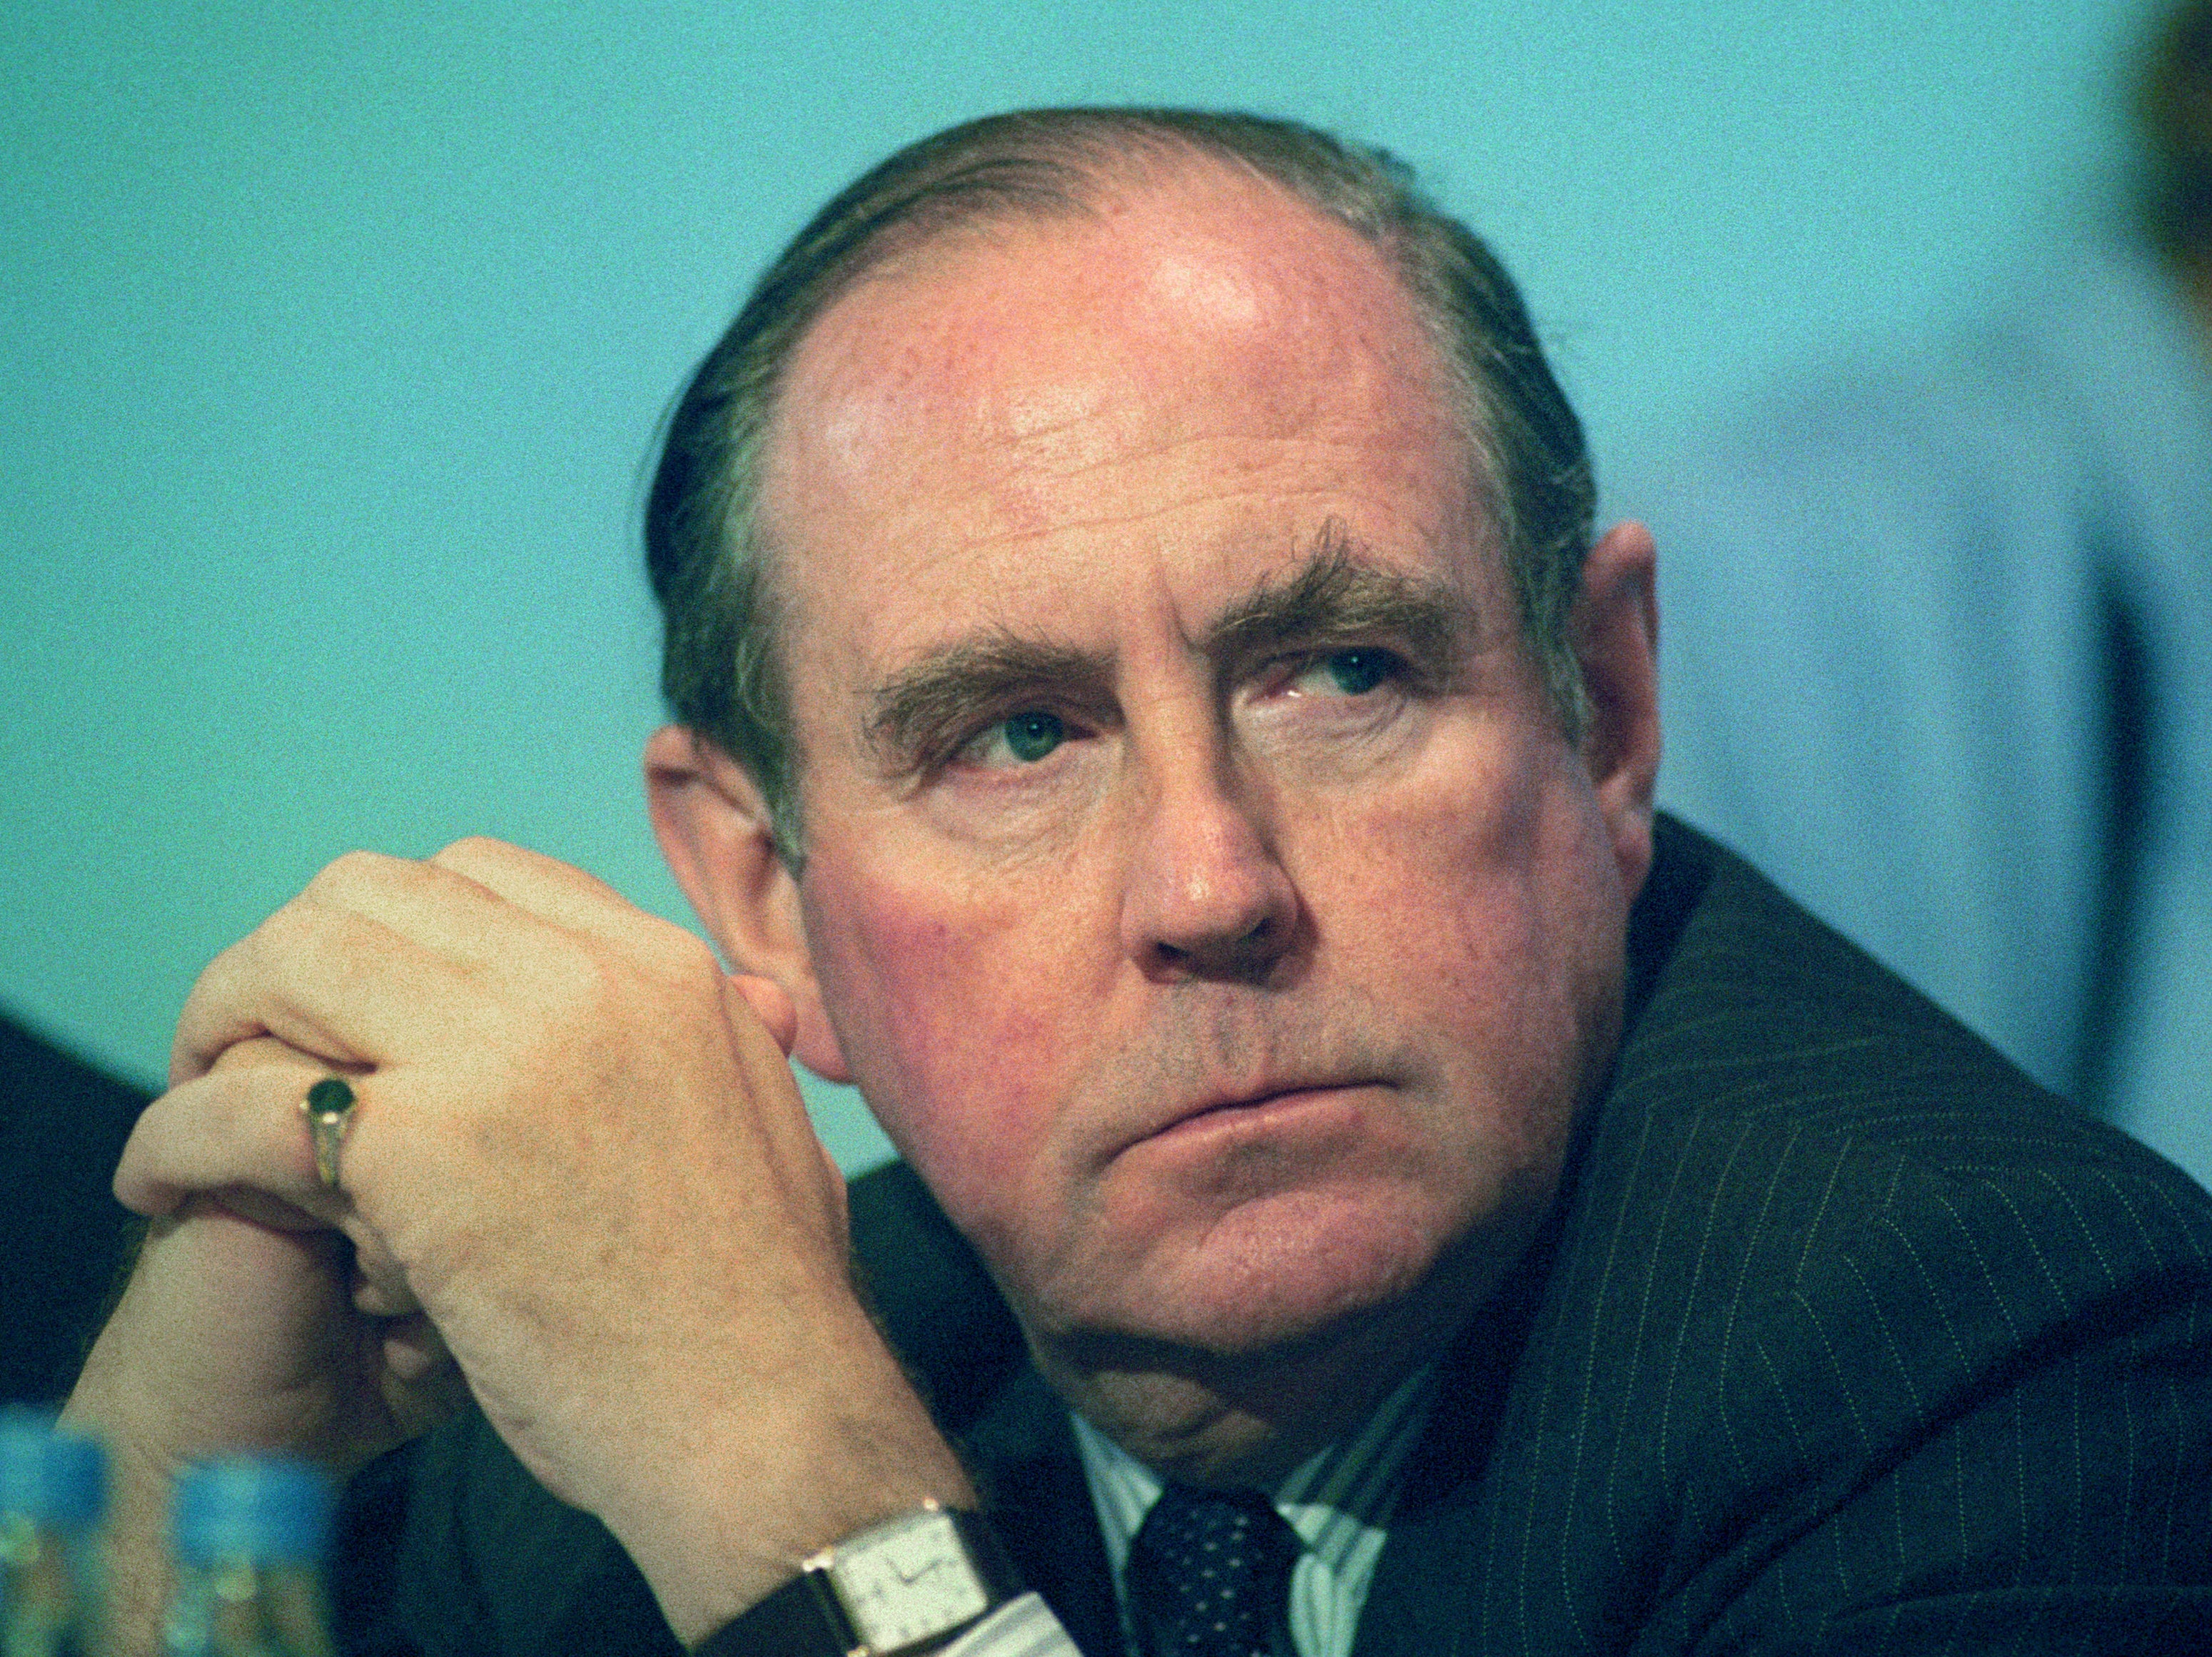 Peter Brooke was a respected Conservative parliamentarian for 38 years